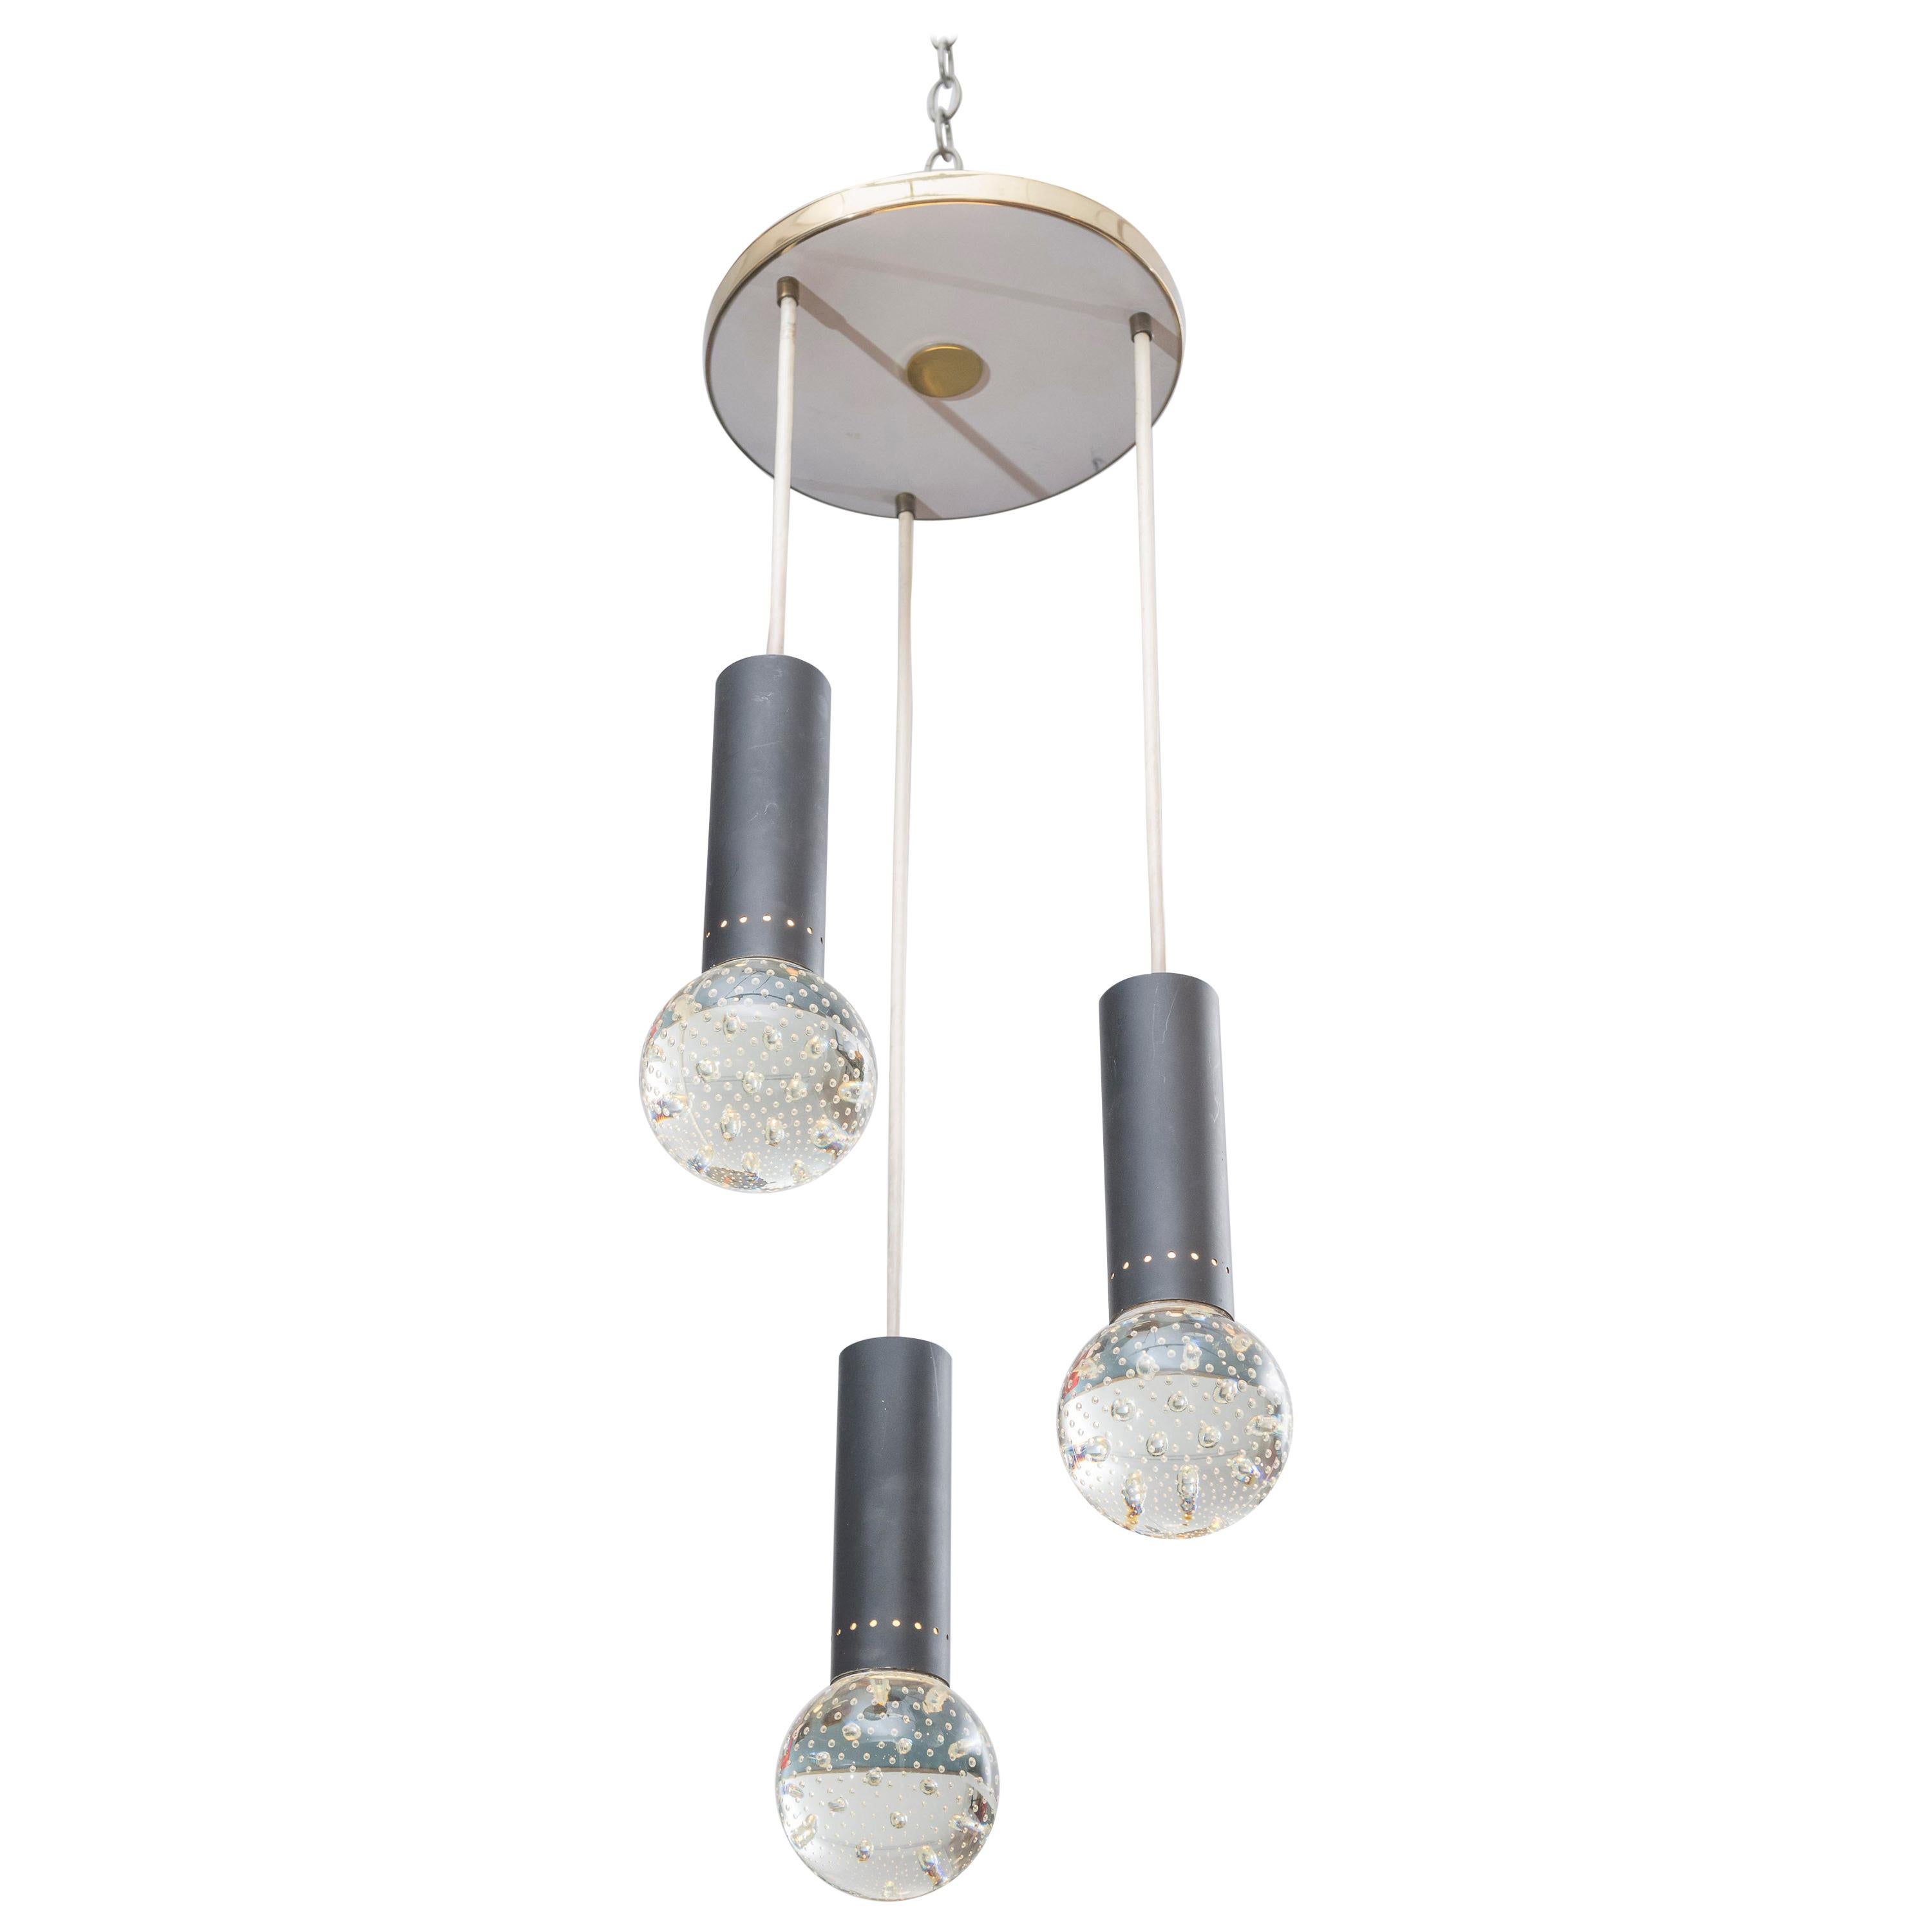 Gino Sarfatti and Archimede Seguso Chandelier for Lightolier For Sale